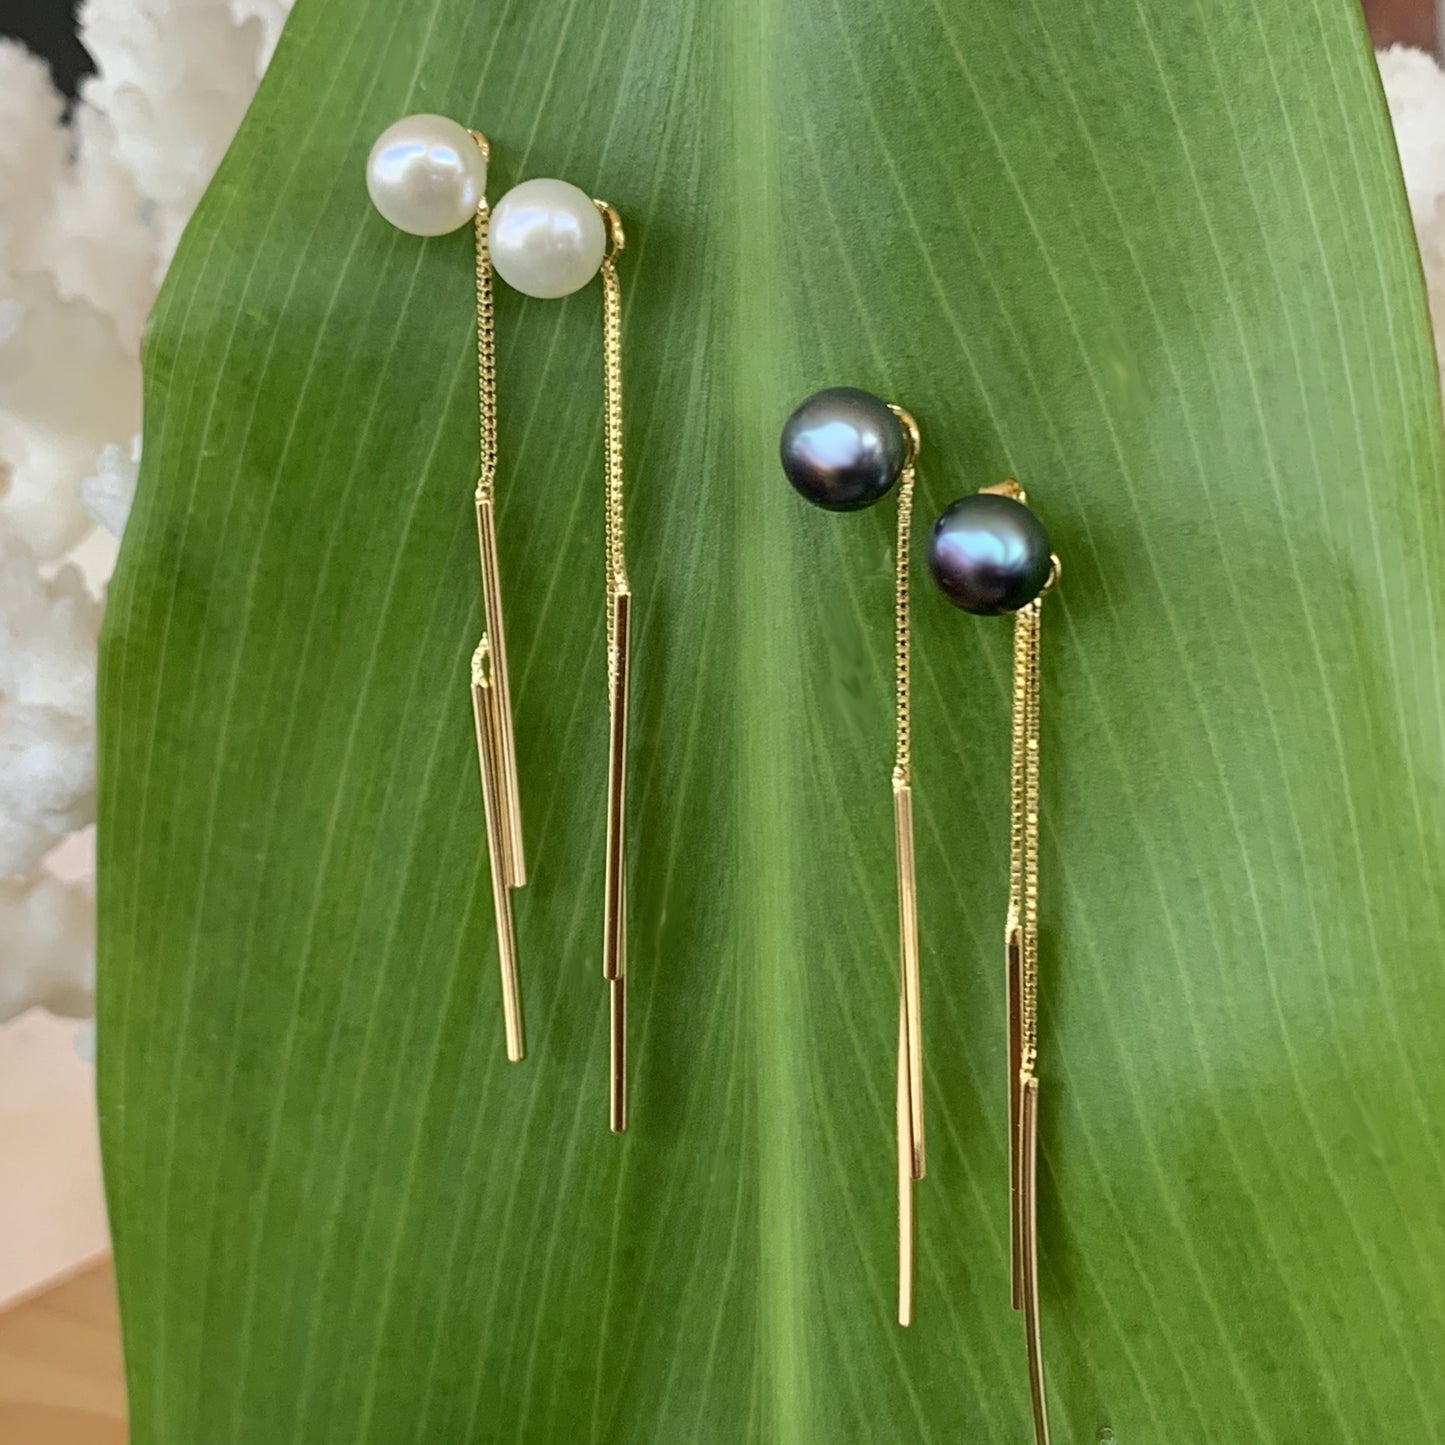 Chopstick Earrings in 14K Gold Plated over .925 Sterling Silver with Freshwater Pearl in Black and White